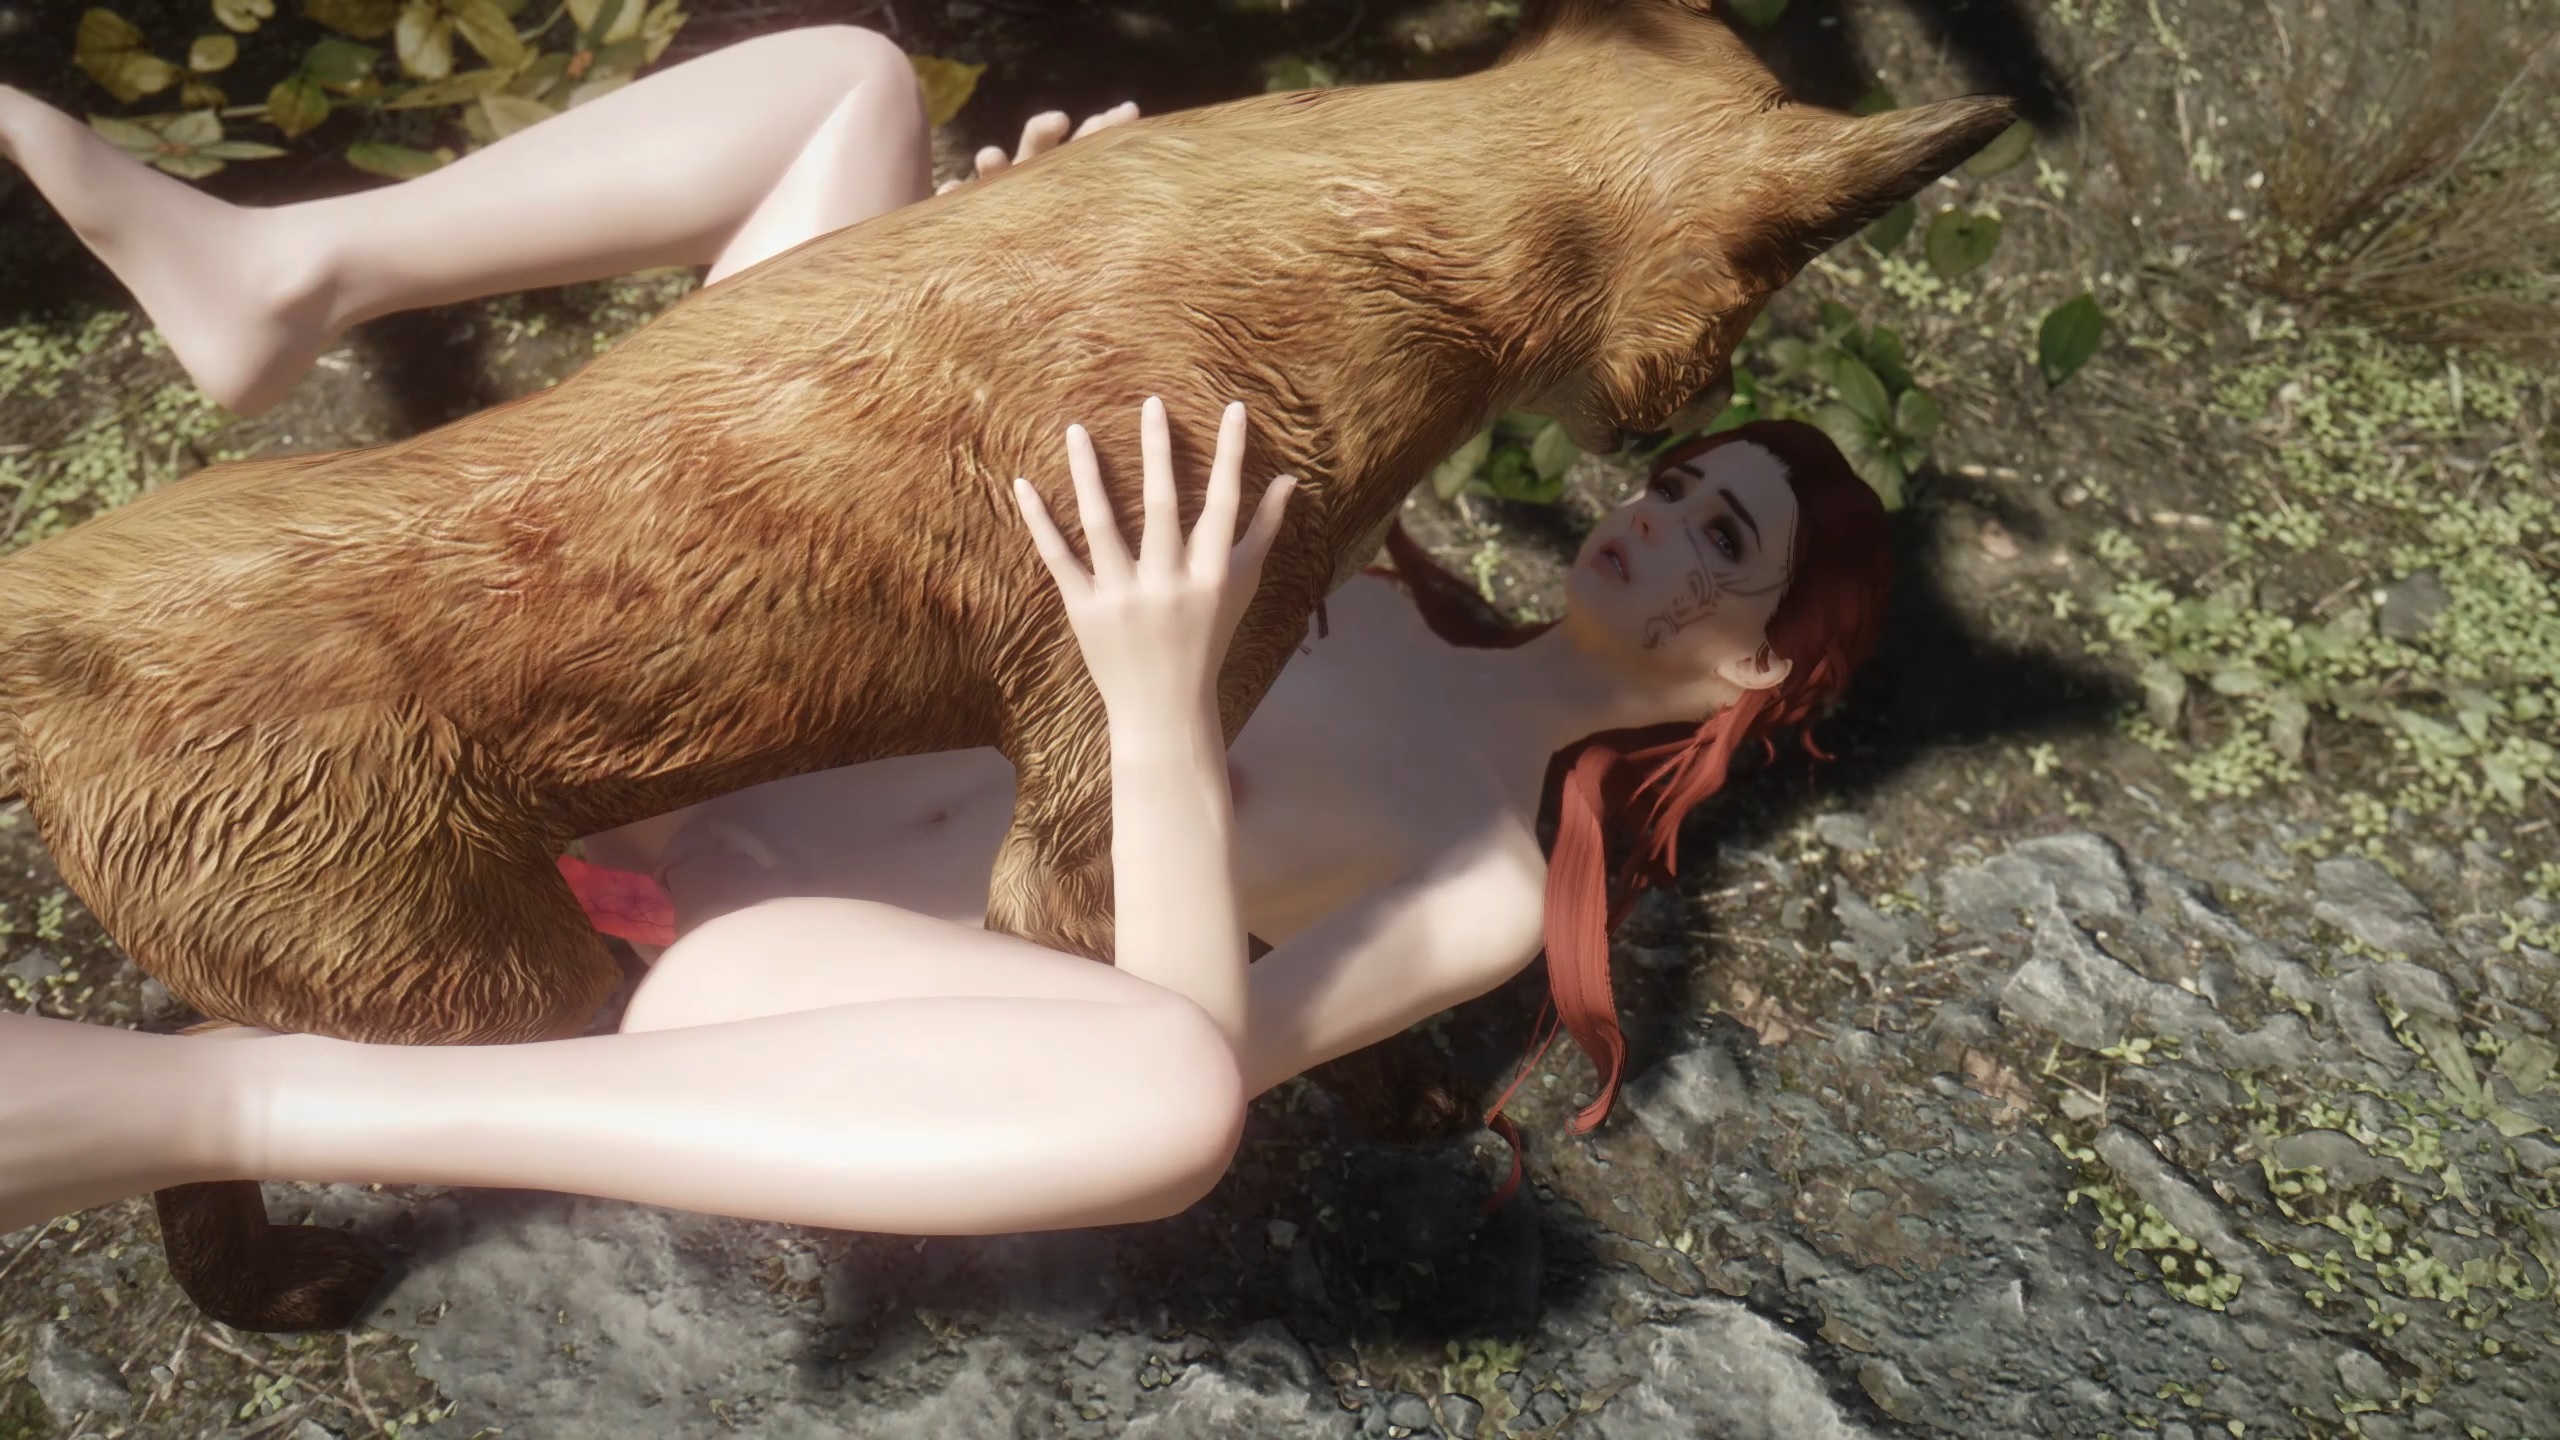 Aela The Huntress Porn - Aela the huntress in the forest